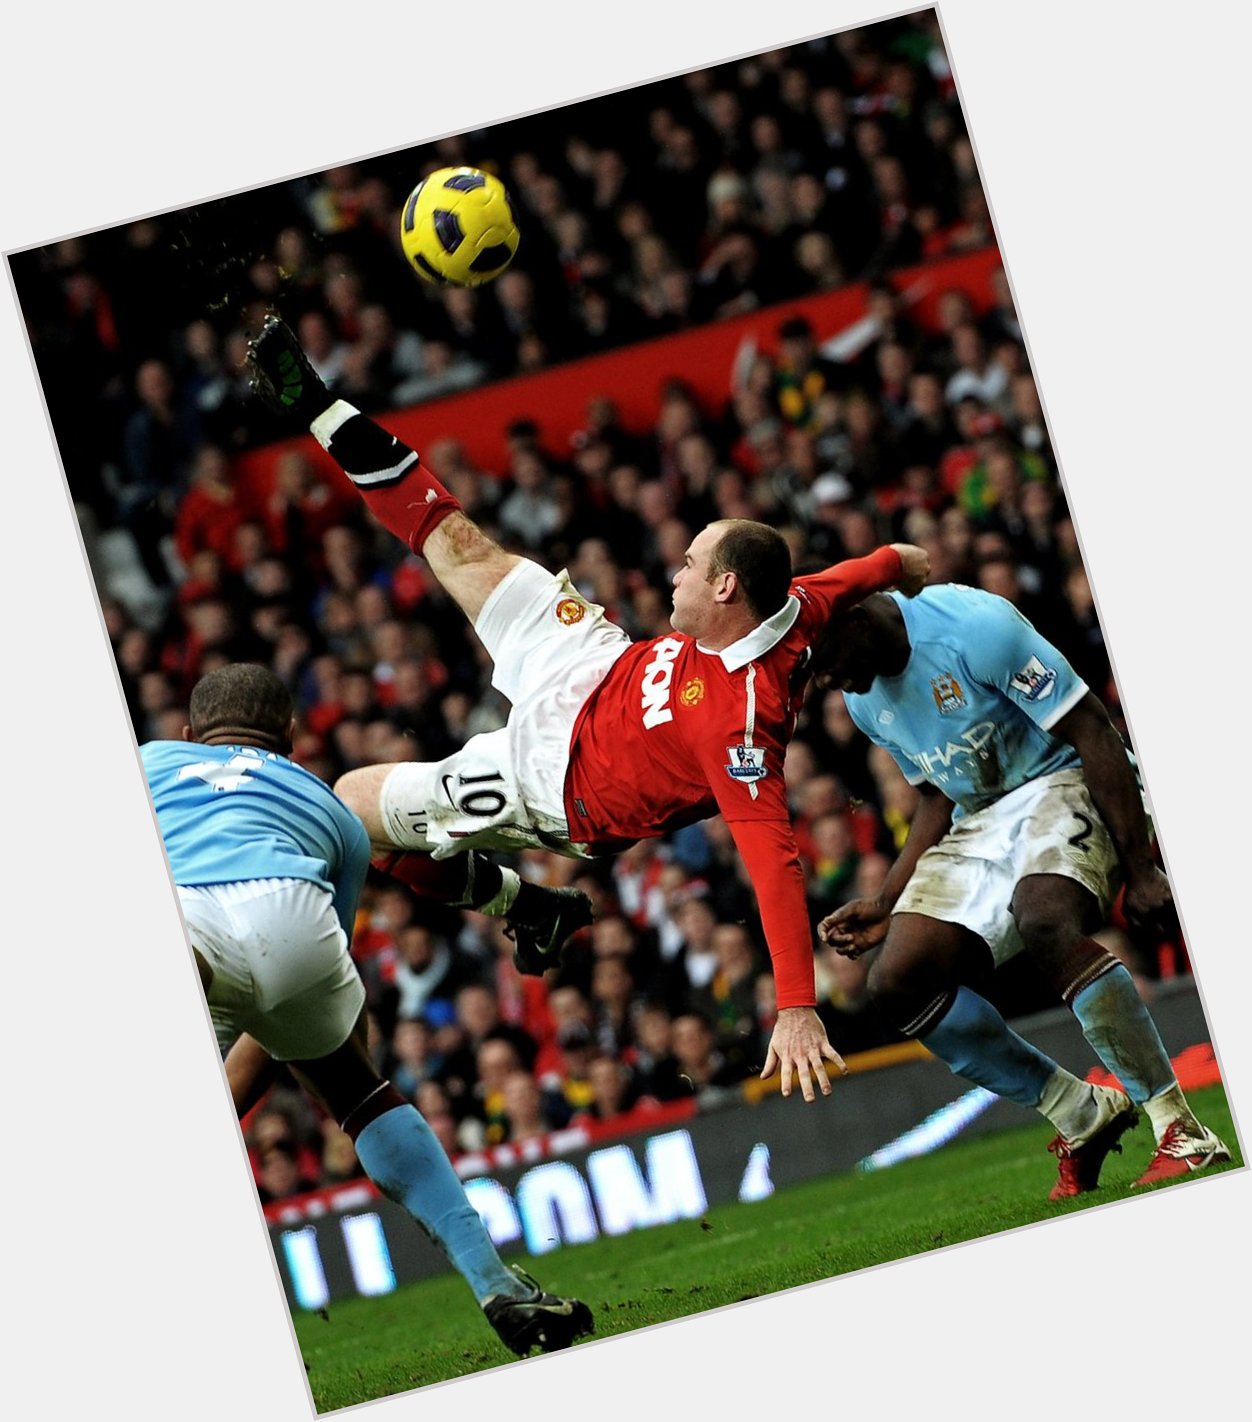 Happy birthday to Man United and England\s record goalscorer Wayne Rooney  What a player he was 